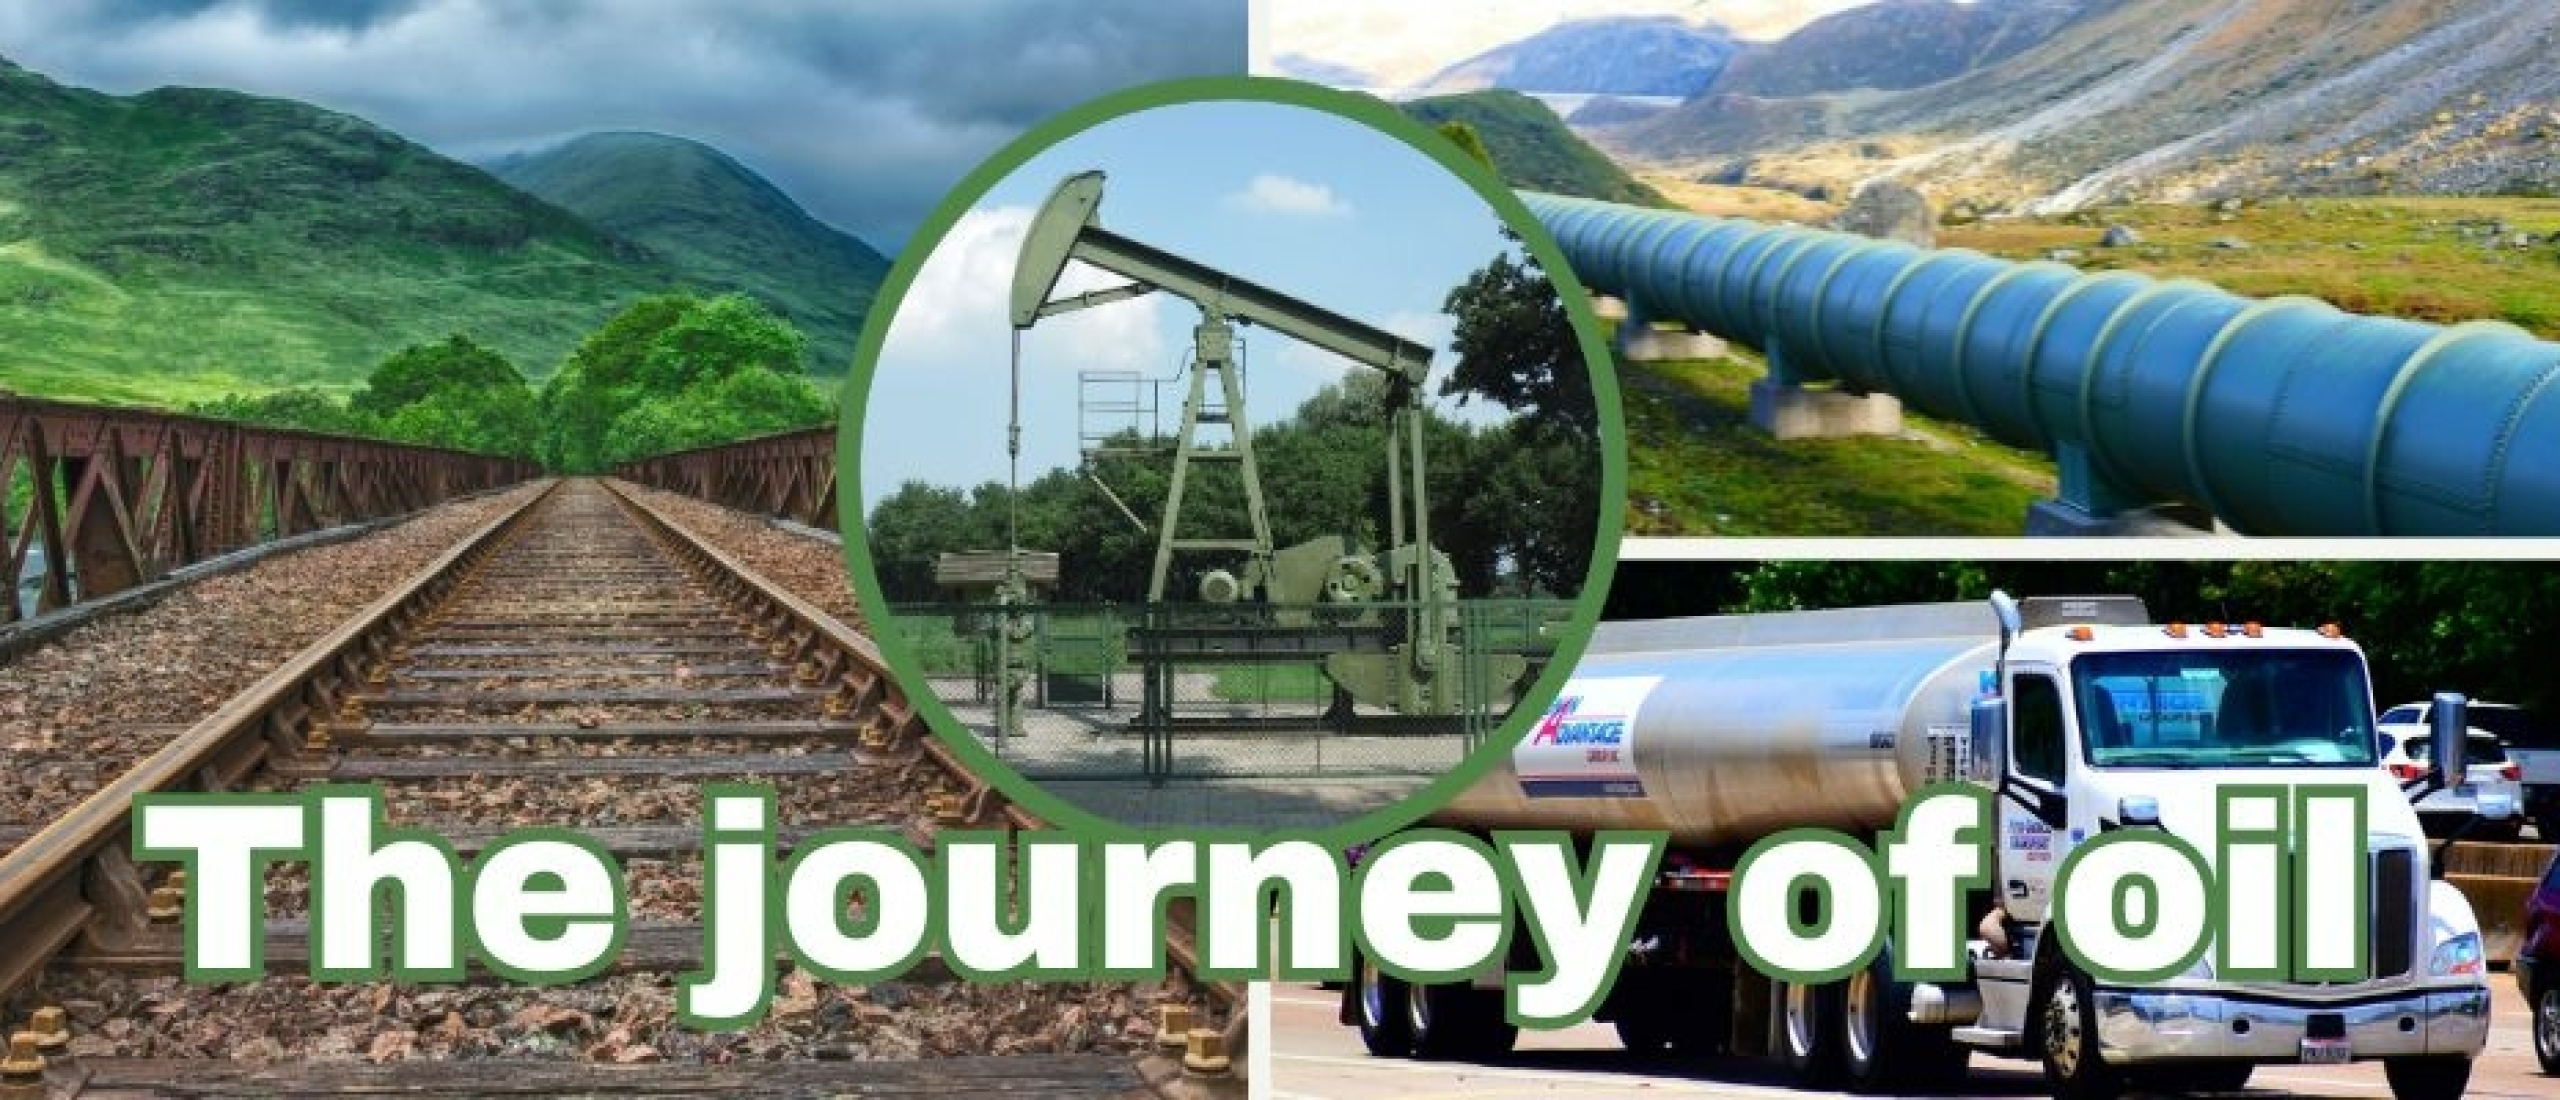 The journey of oil